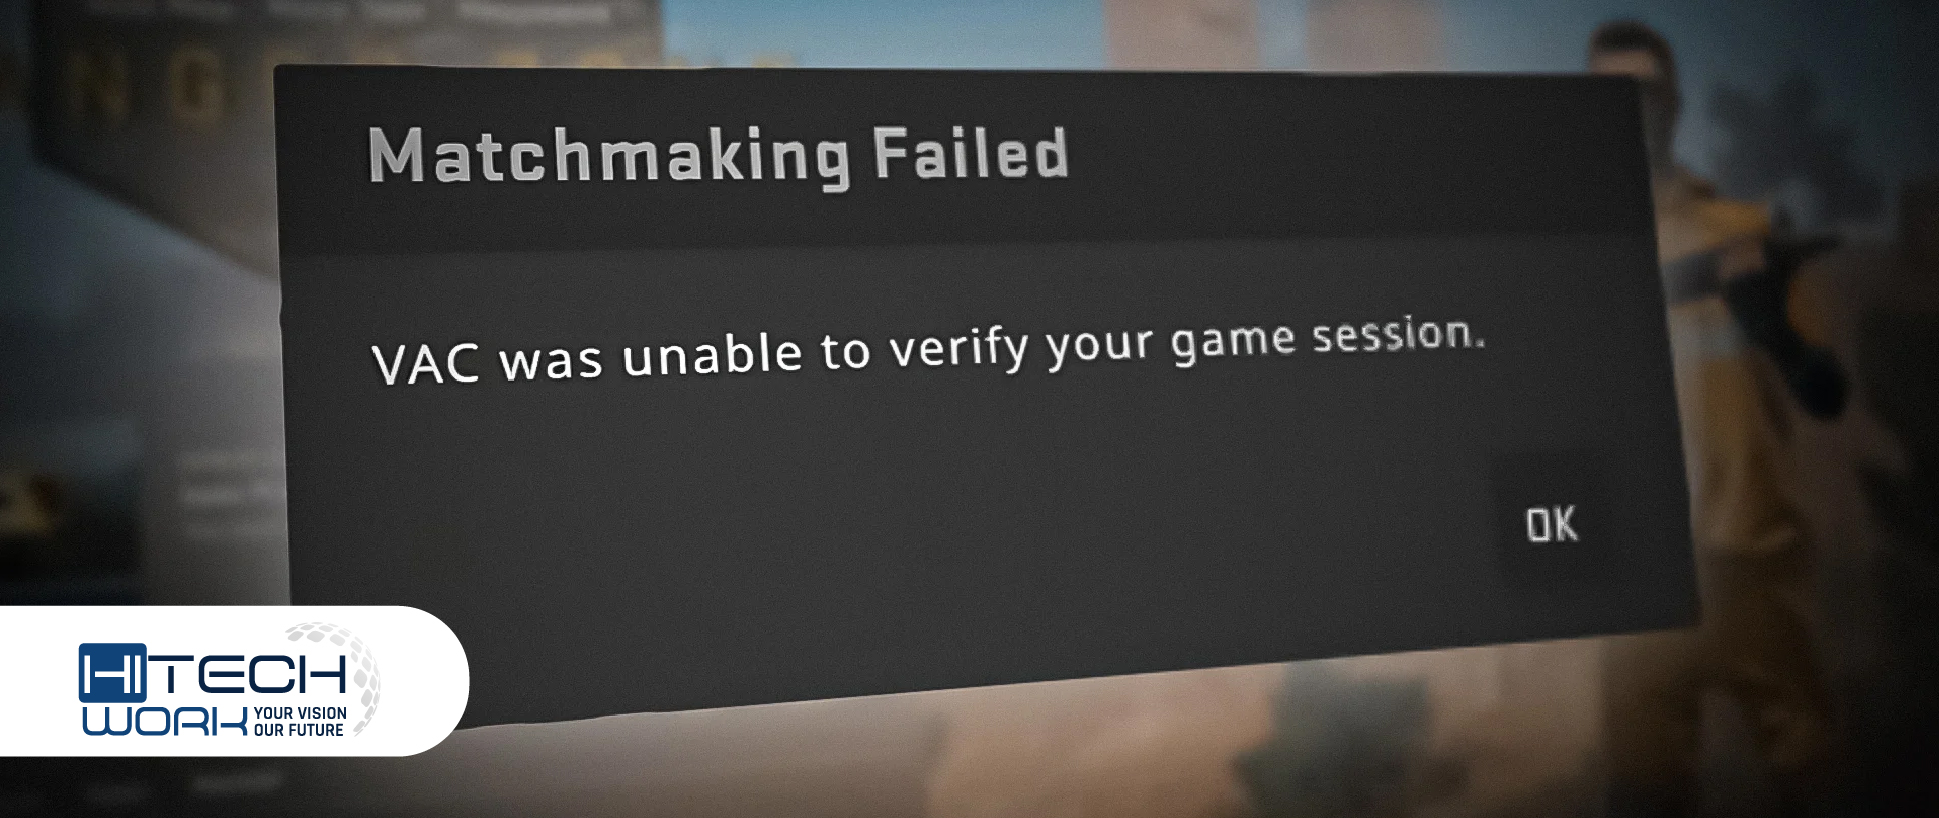 Vac was unable to verify your game session